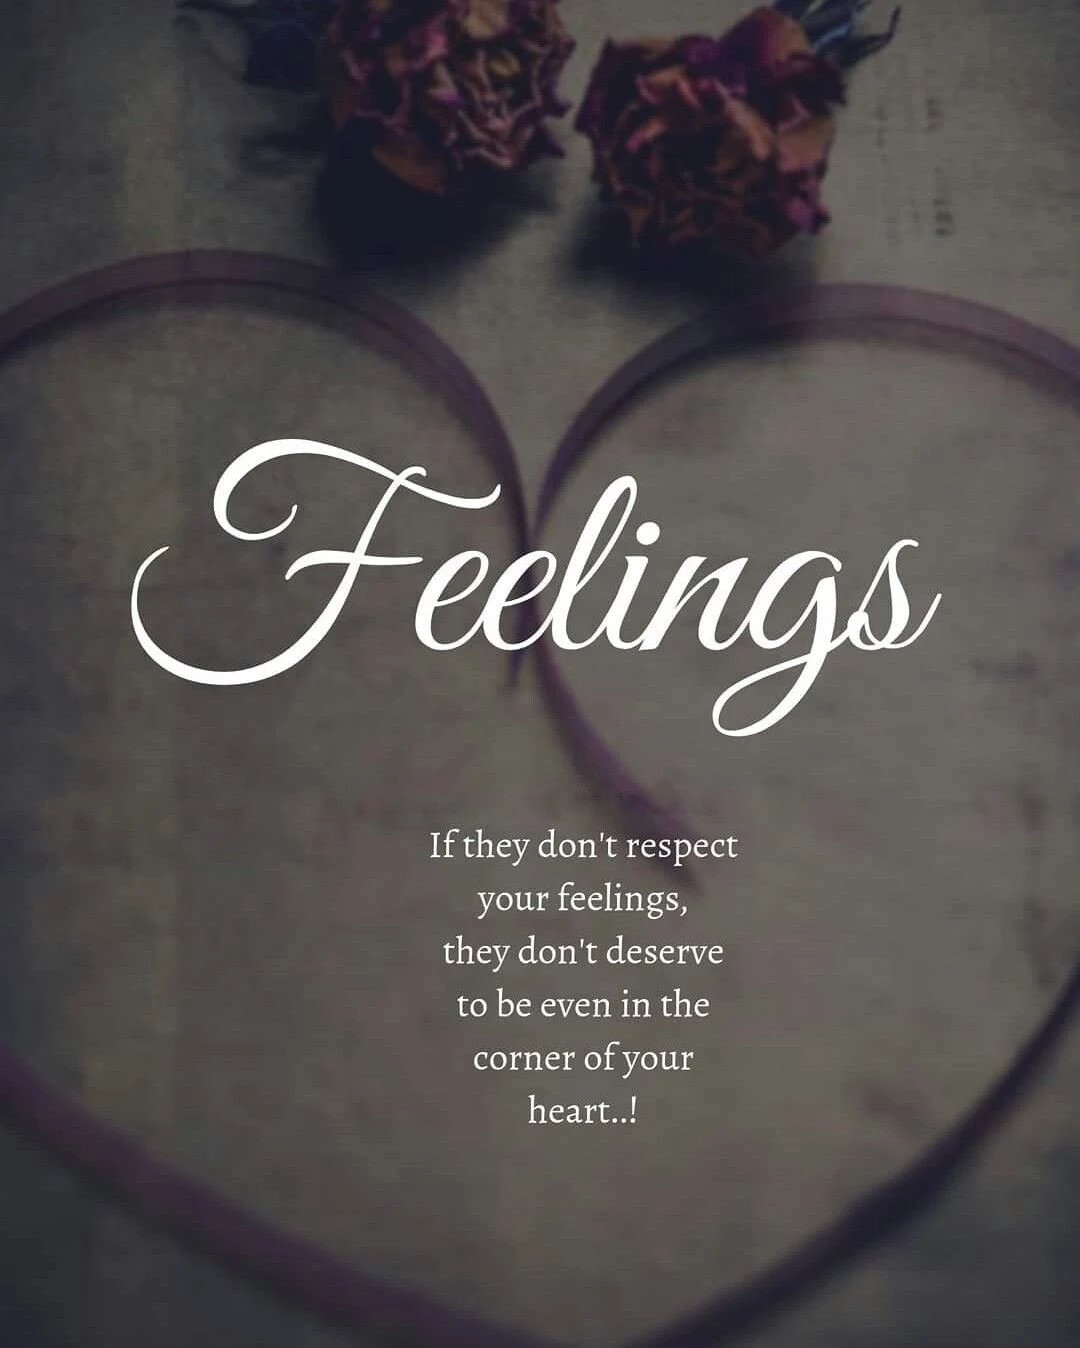 Sad Quotes Collection for WhatsApp DP/Status